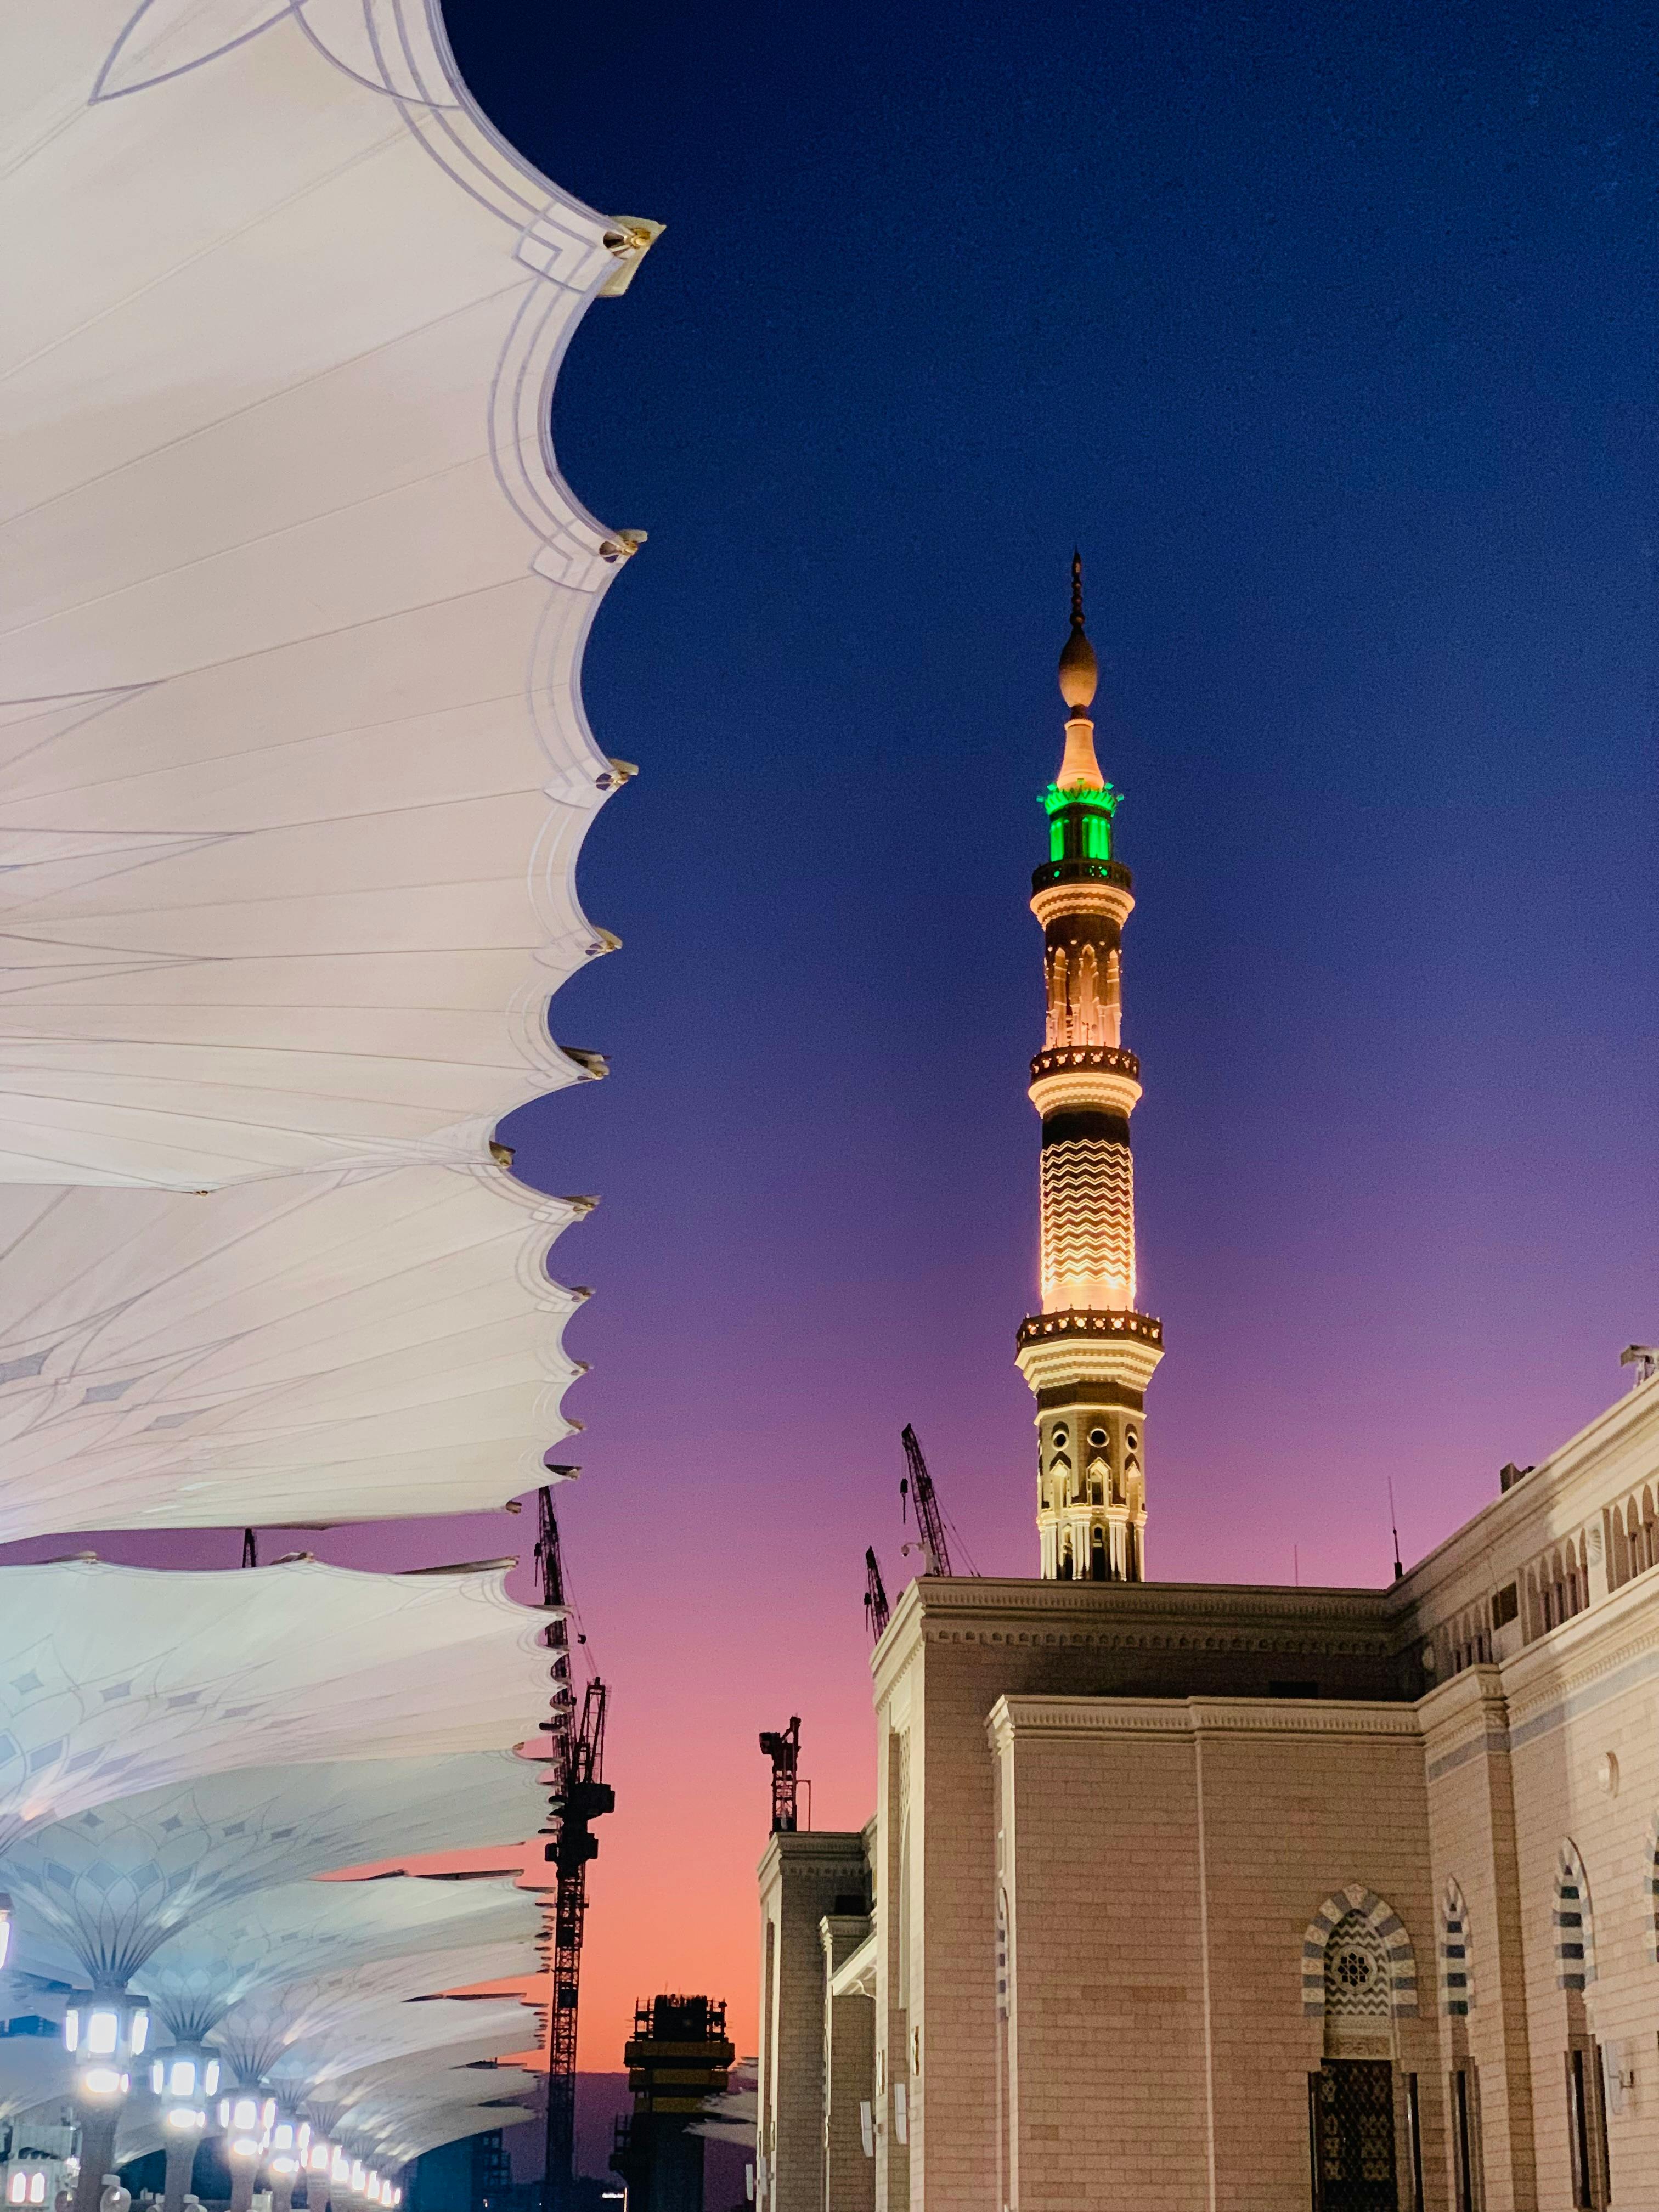 Masjid Nabawi Photos, Download The BEST Free Masjid Nabawi Stock Photos &  HD Images